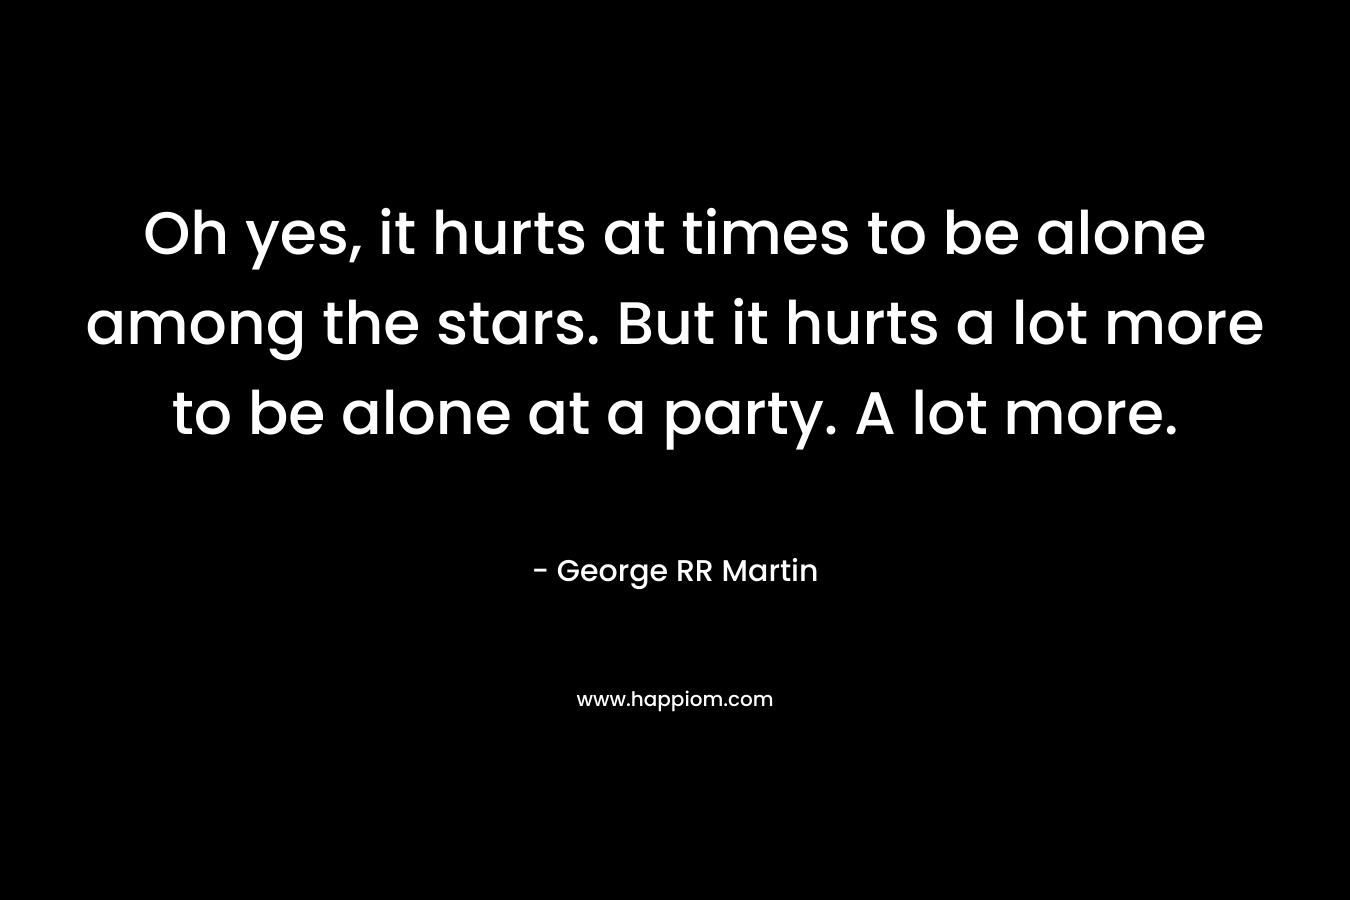 Oh yes, it hurts at times to be alone among the stars. But it hurts a lot more to be alone at a party. A lot more.